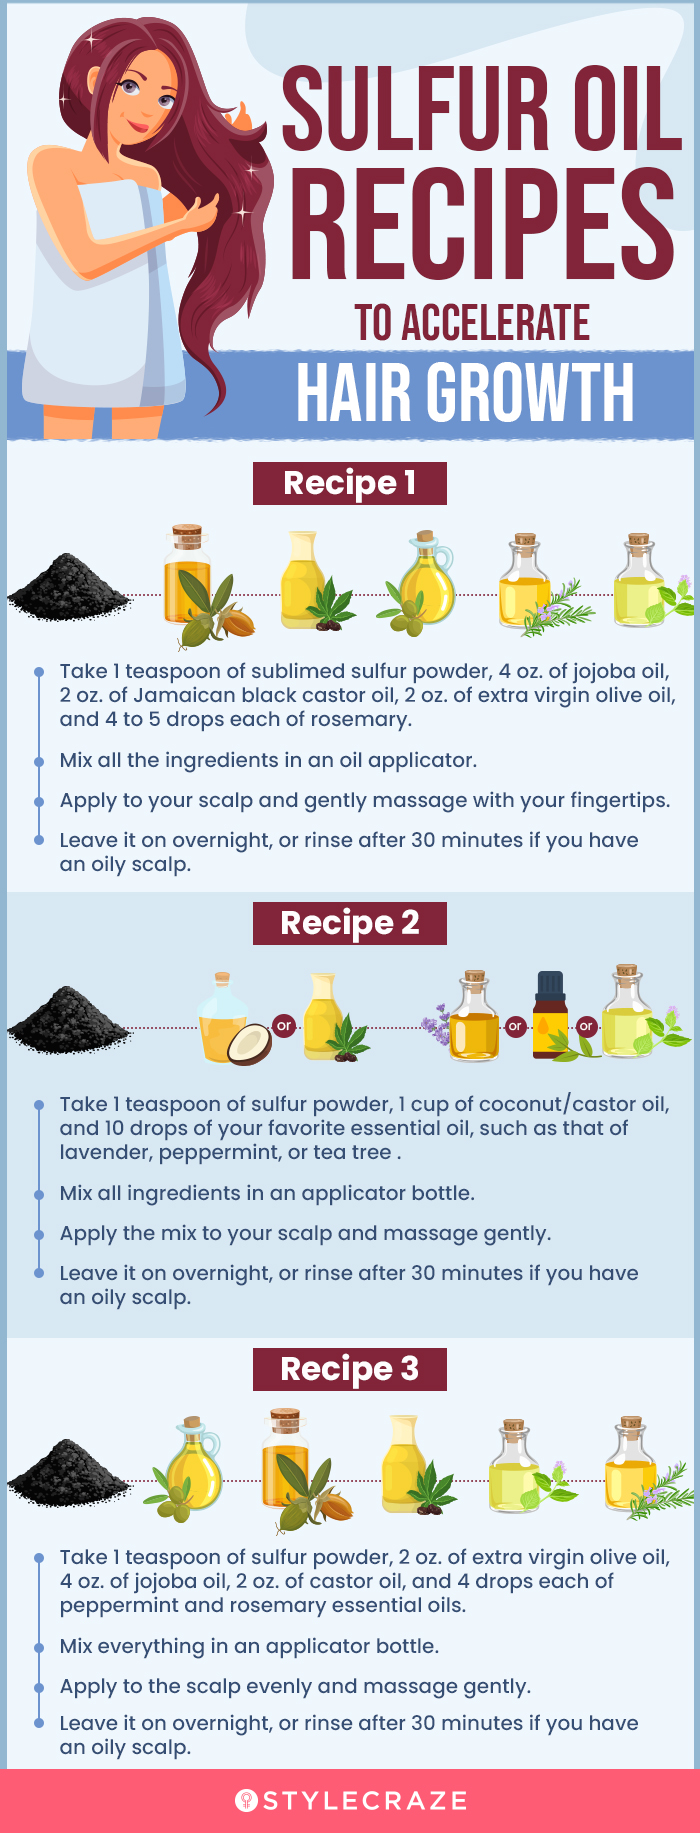 sulfur oil recipes to accelerate hair growth (infographic)